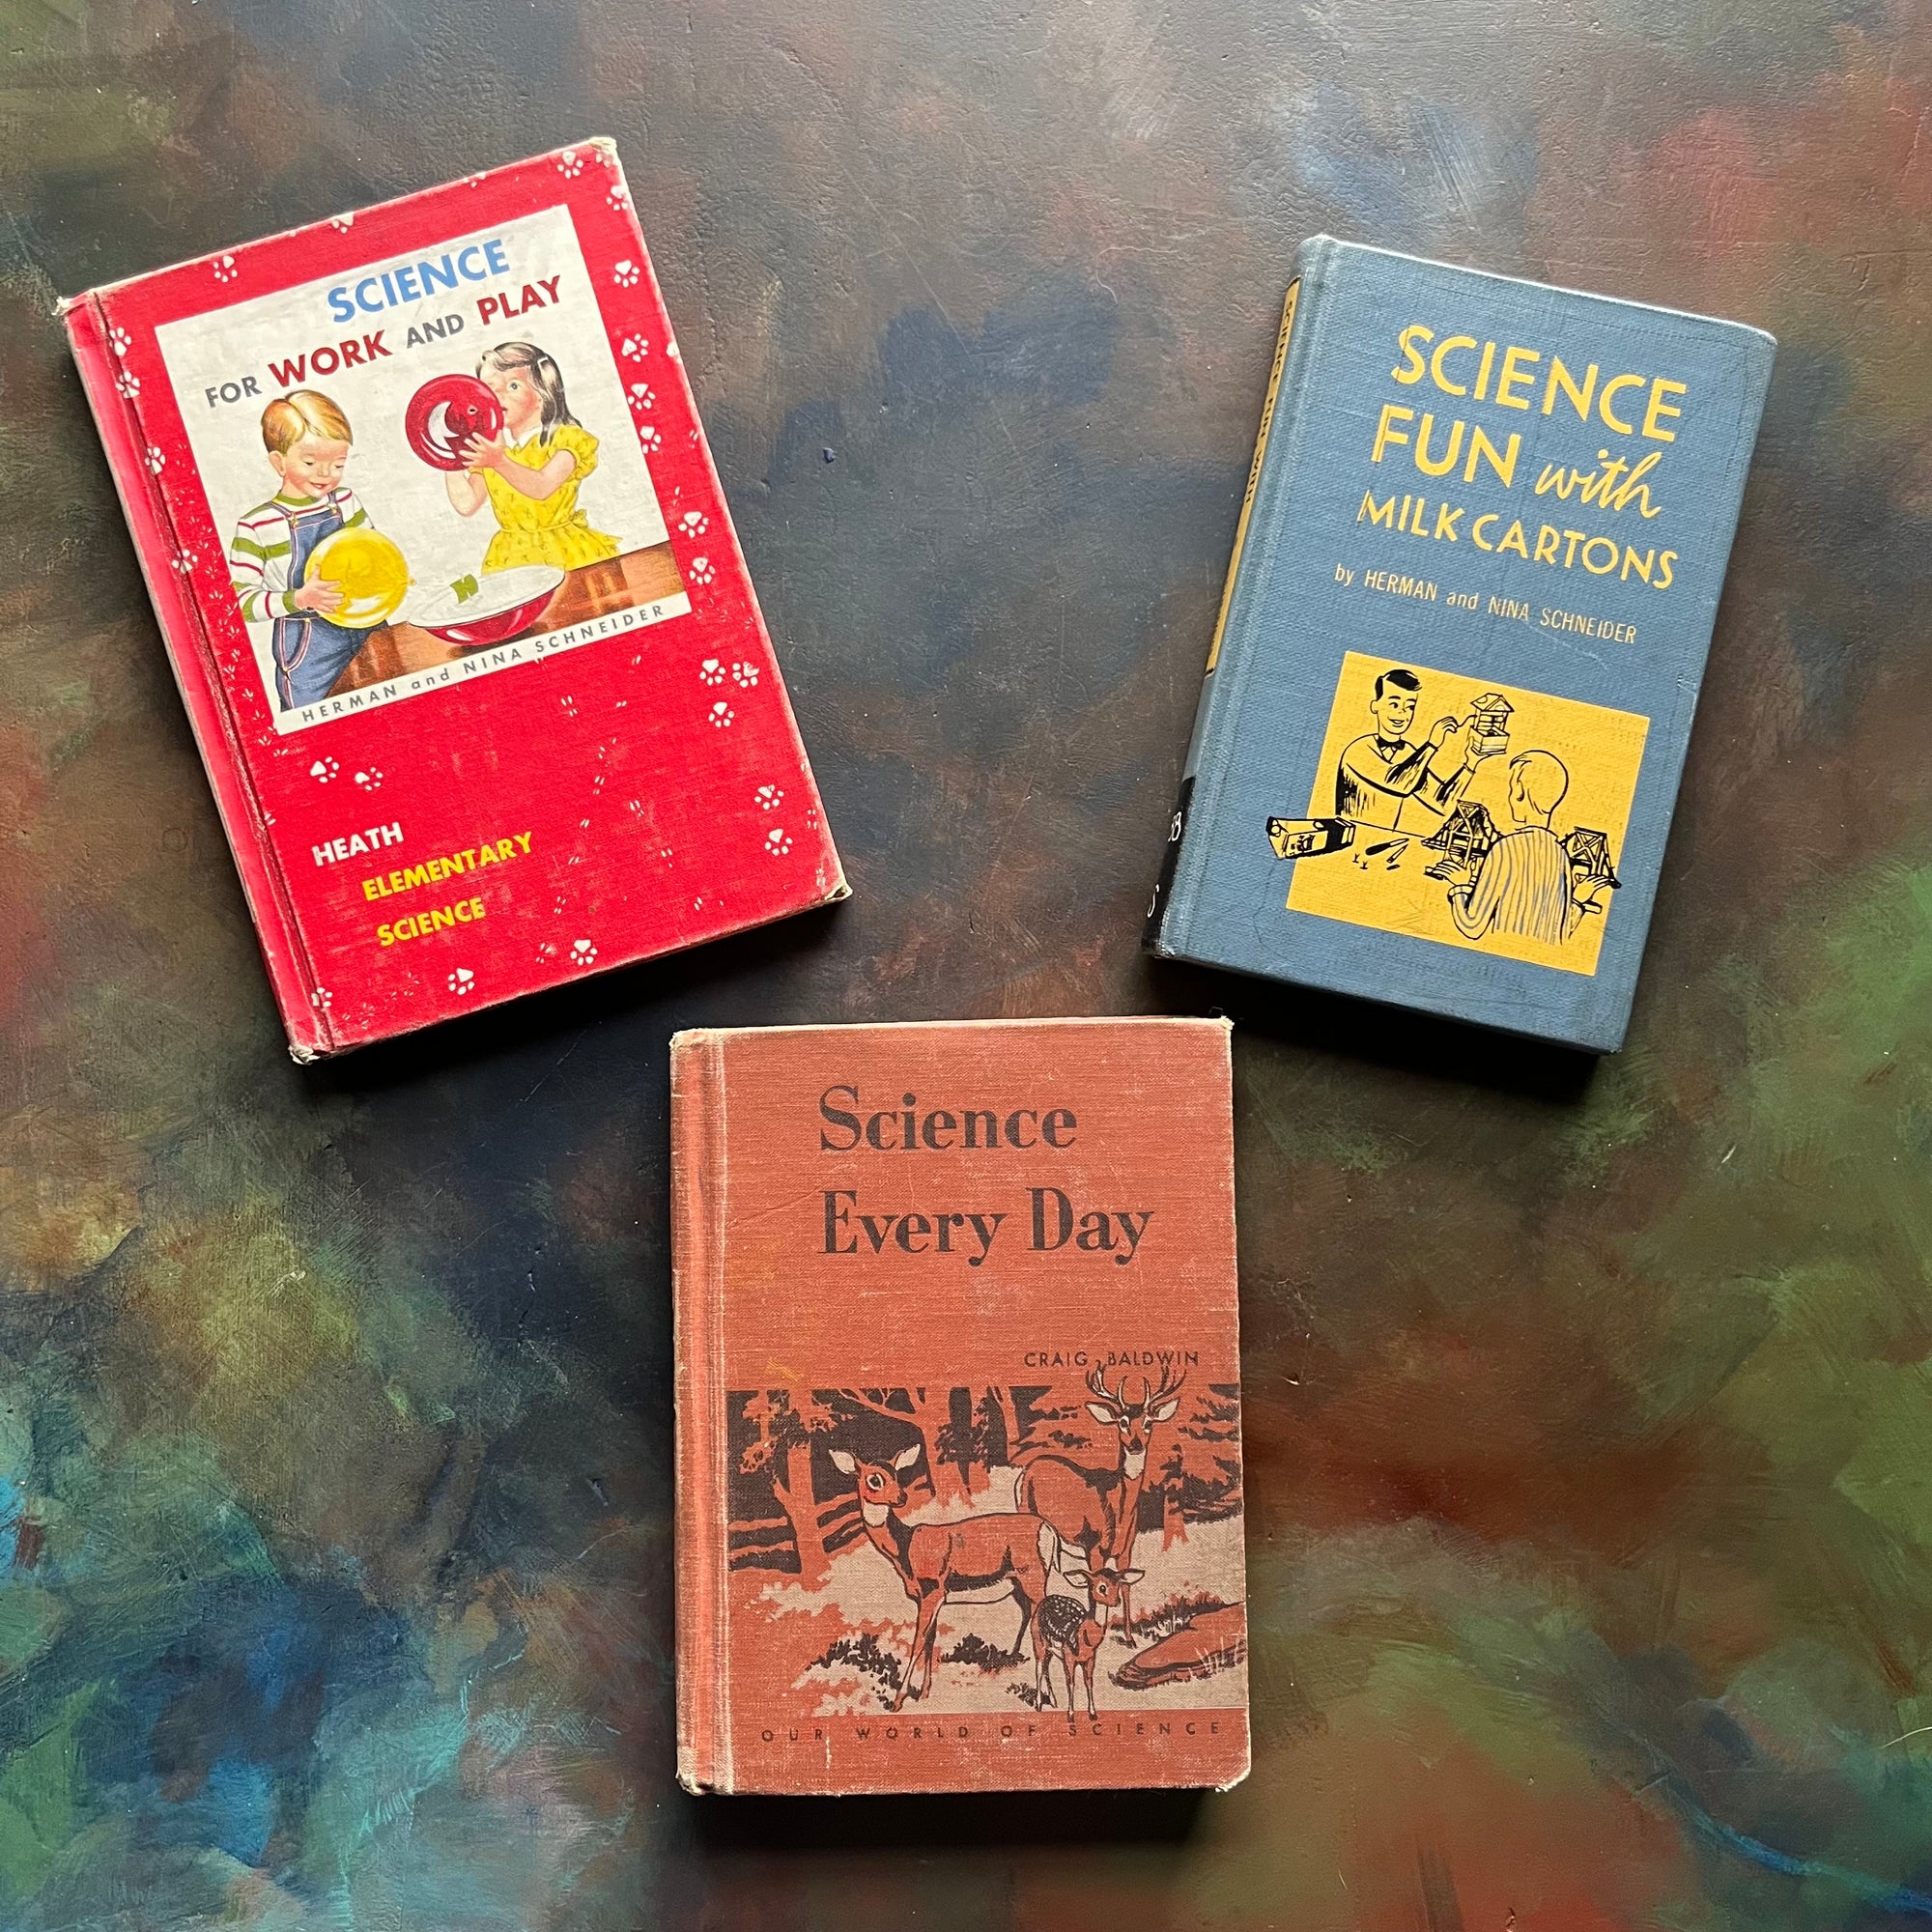 Set of Three Vintage Science Elementary School Books-Science Every Day, Science Fun with Milk Cartons and Science for Work and Play-vintage schoolbooks-view of the front covers